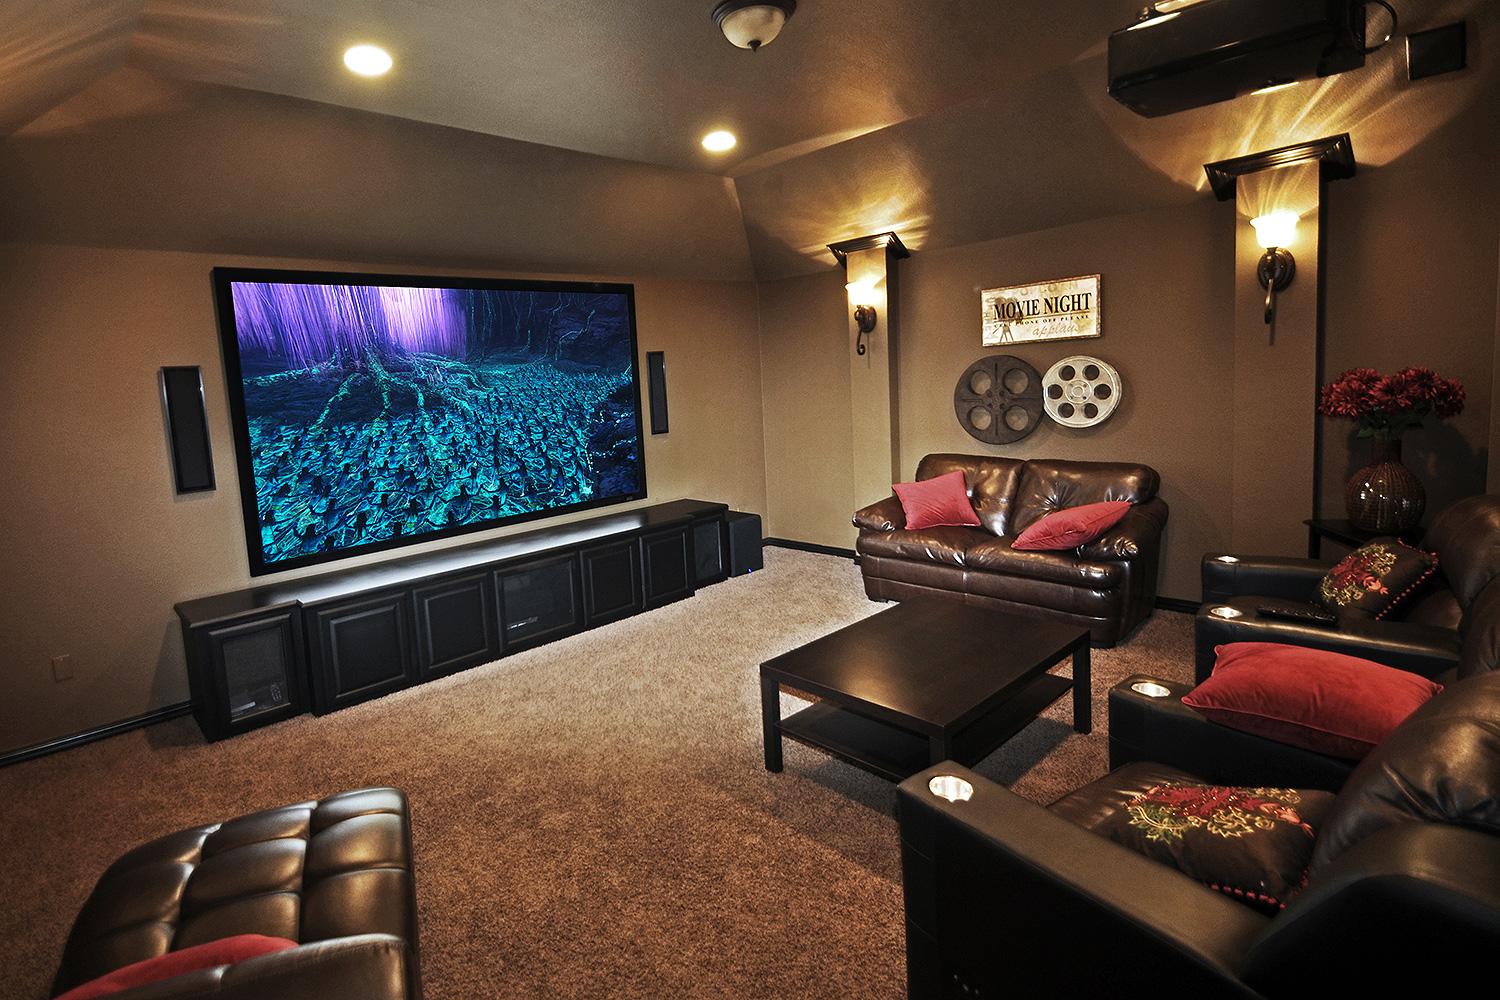 How build a 3D home theater | Digital Trends